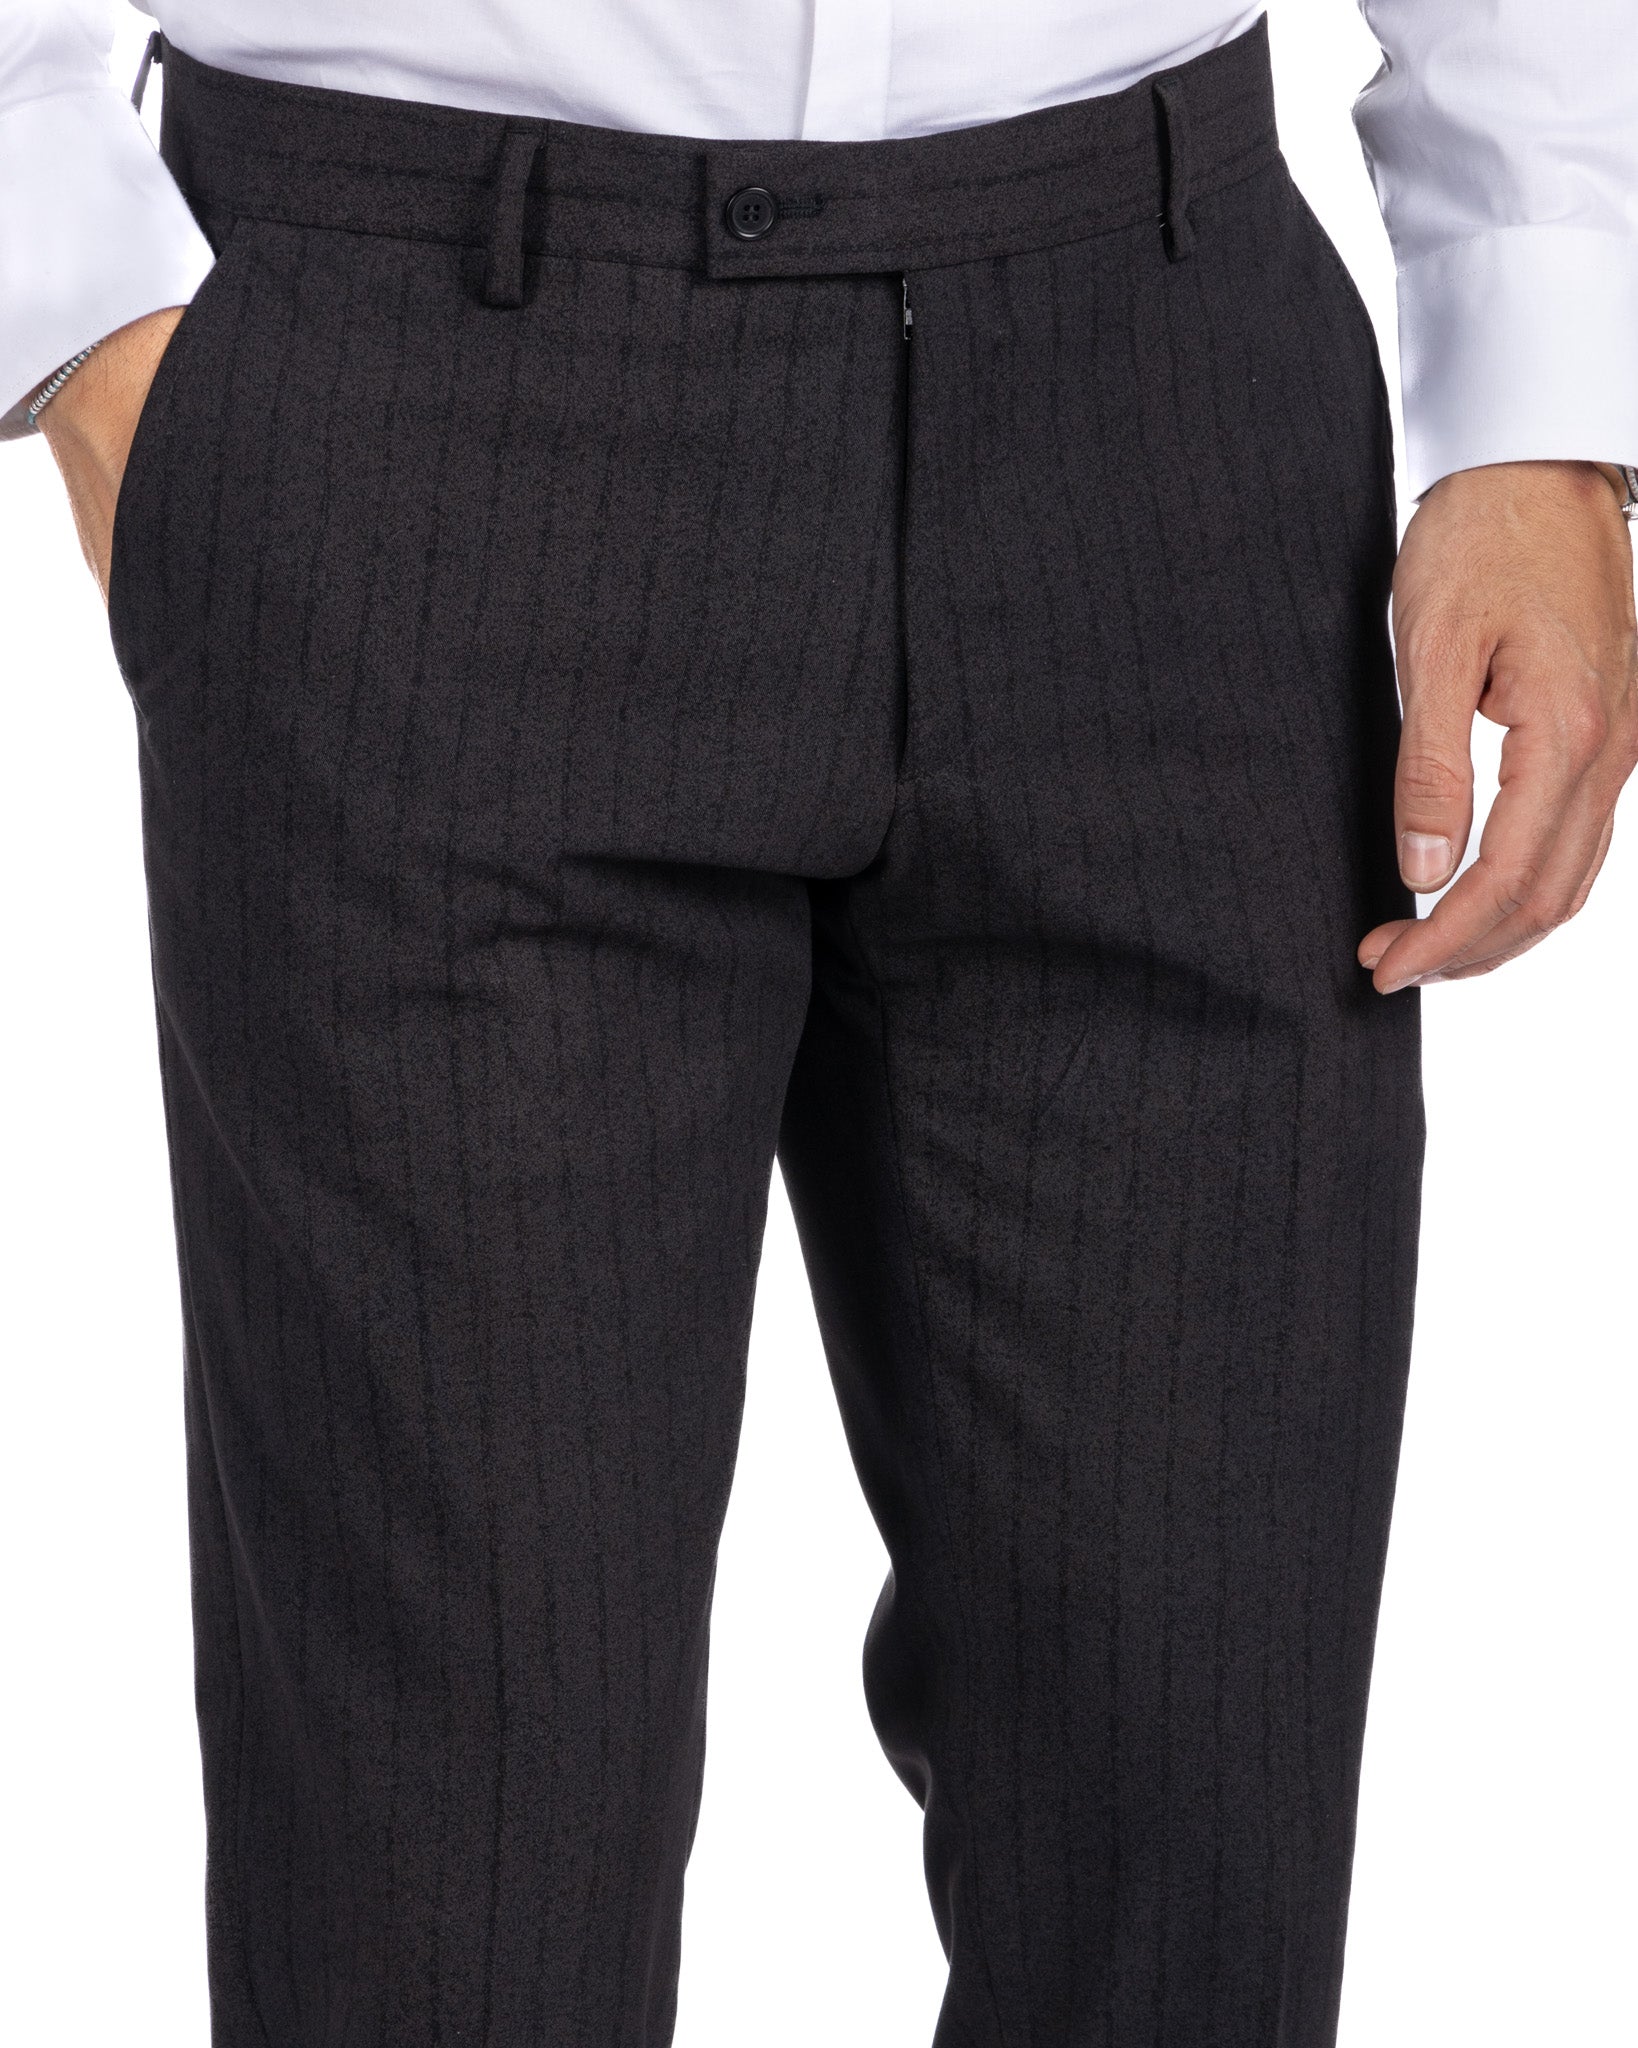 Enzo - anthracite double-breasted pinstripe suit